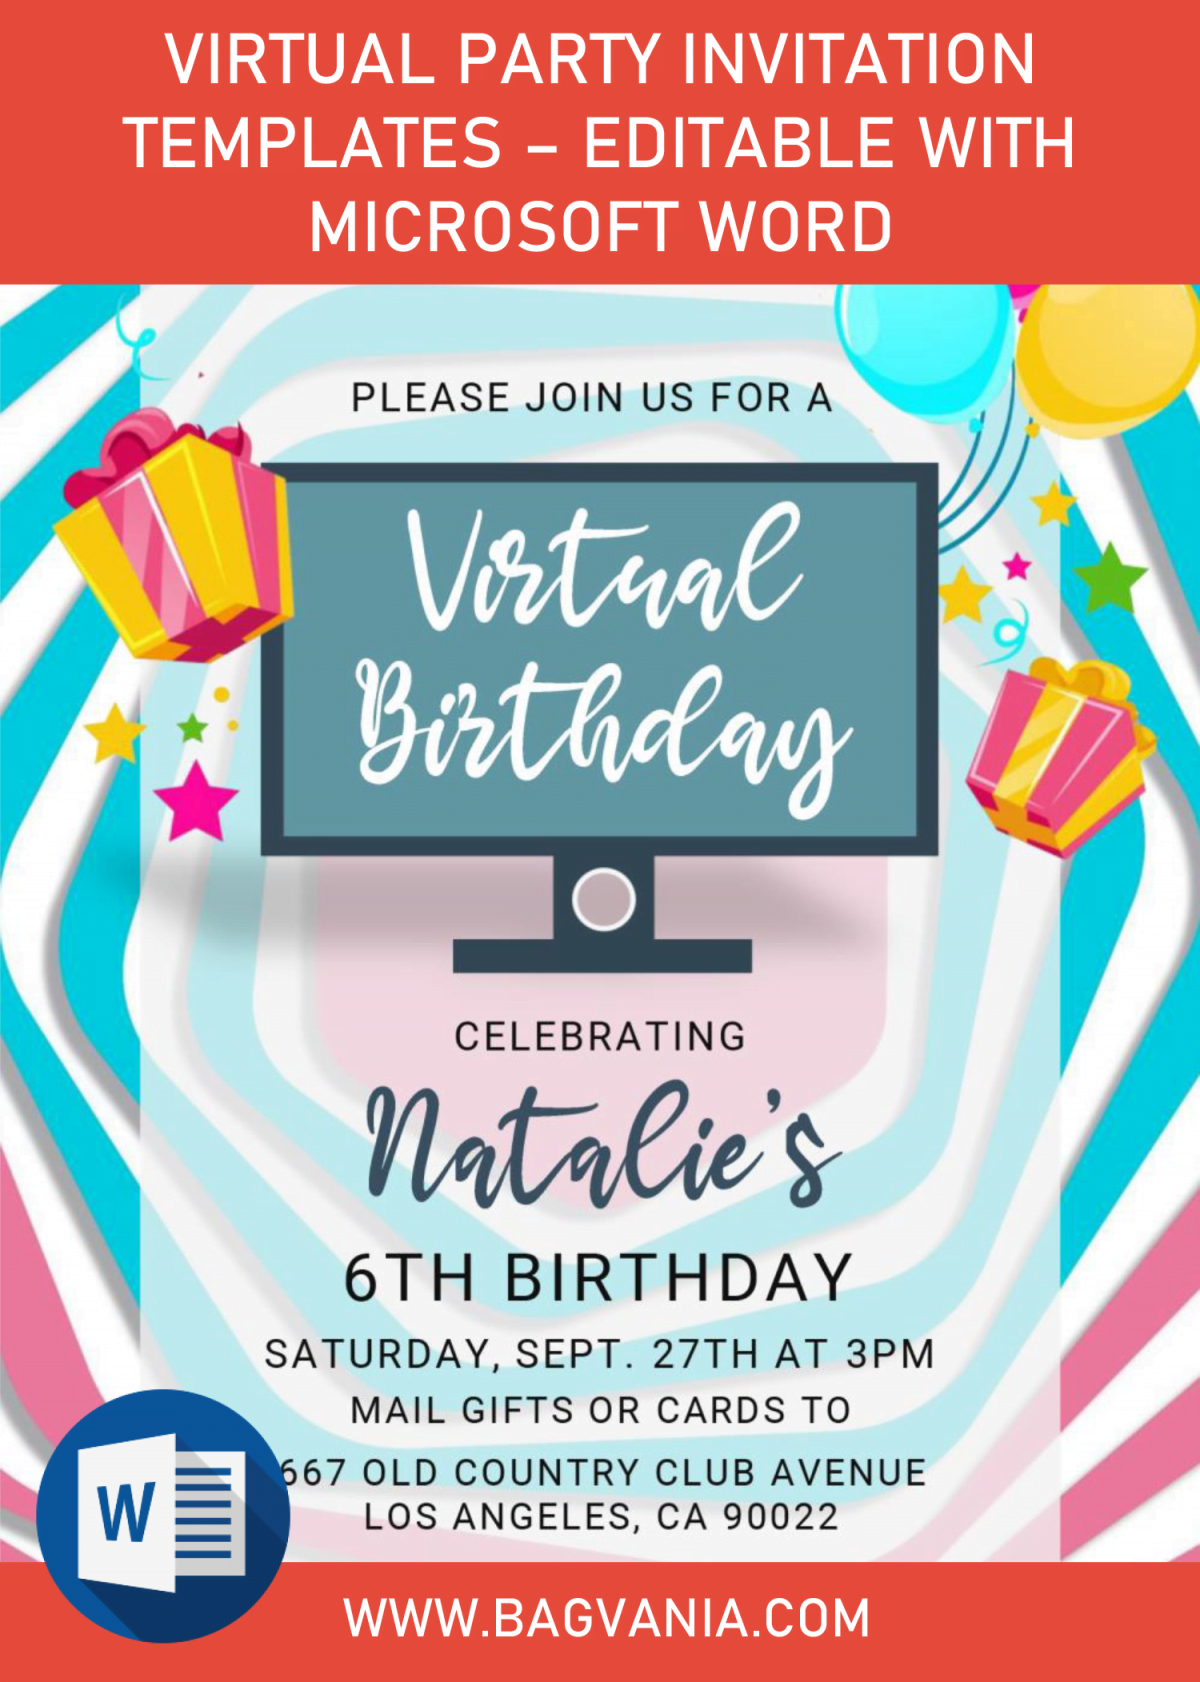 Virtual Party Invitation Templates Editable With Microsoft Word